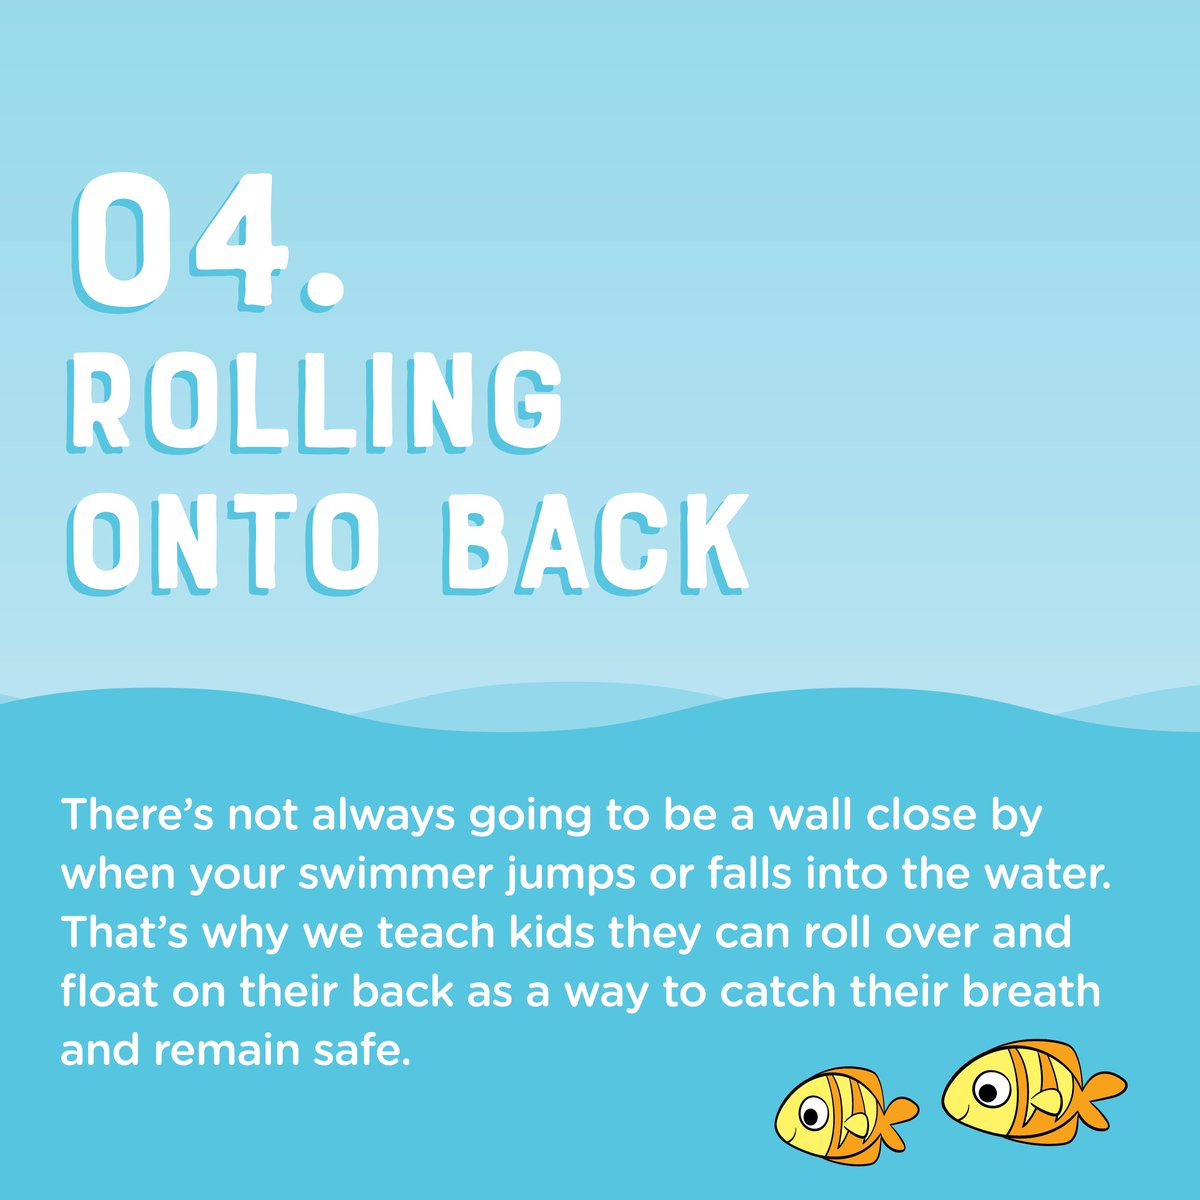 It's #NationalLearnToSwimDay, so we're sharing the 5 basic #swimskills that every kiddo should know! We teach these skills using our #playbased curriculum, the Science of SwimPlay® to help children learn these life-saving skills in the most effective (& engaging!) way possible.